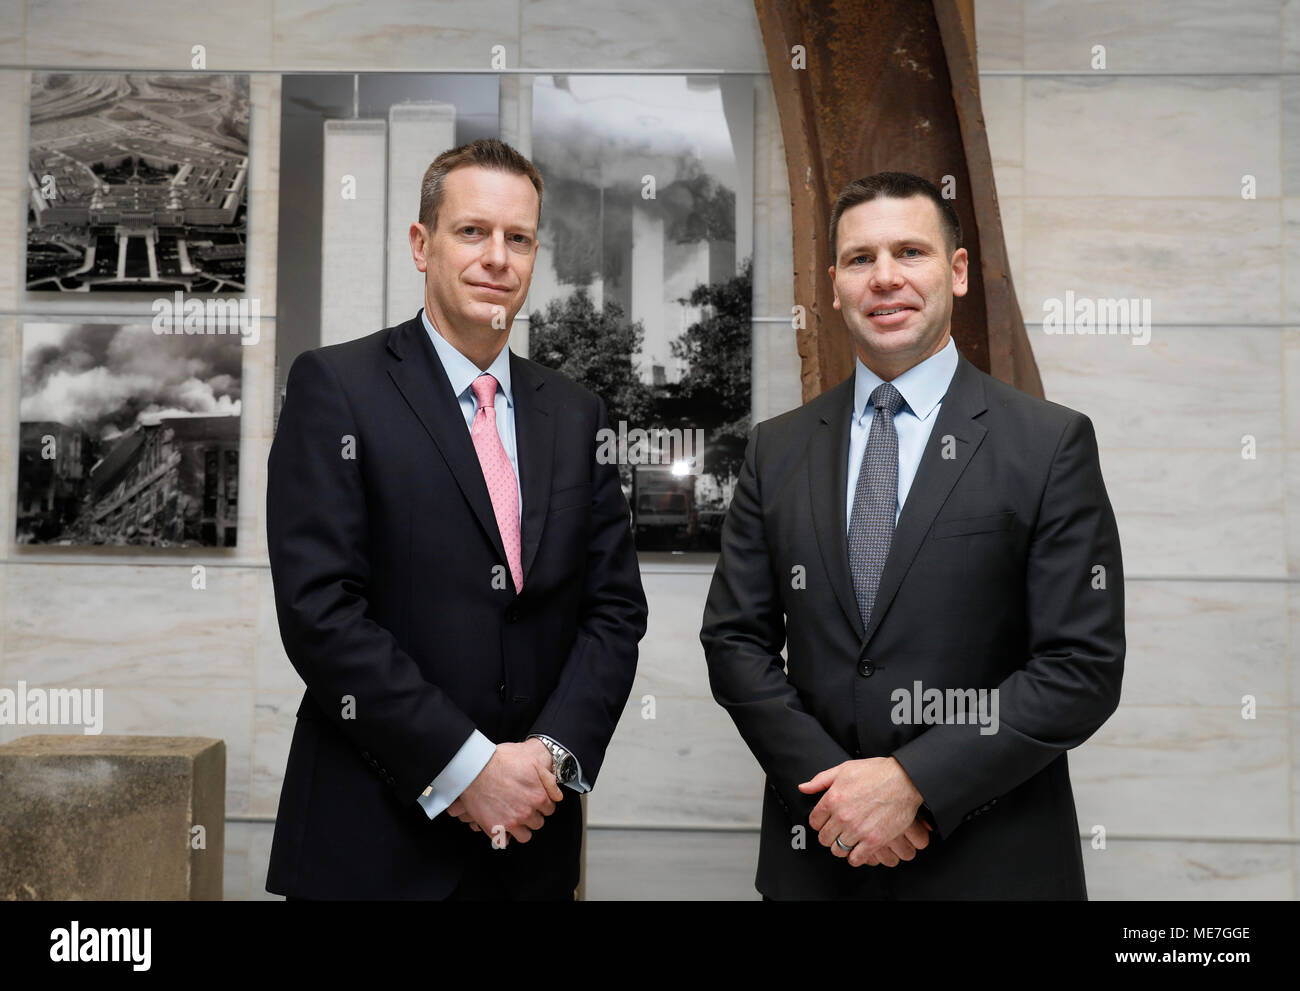 United Kingdom Border Force Director General Paul Lincoln (left) meets with U.S. Customs and Border Protection Acting Commissioner Kevin McAleenan at the National Targeting Center January 15, 2018 in Washington, DC.    (photo by Glenn Fawcett via Planetpix) Stock Photo